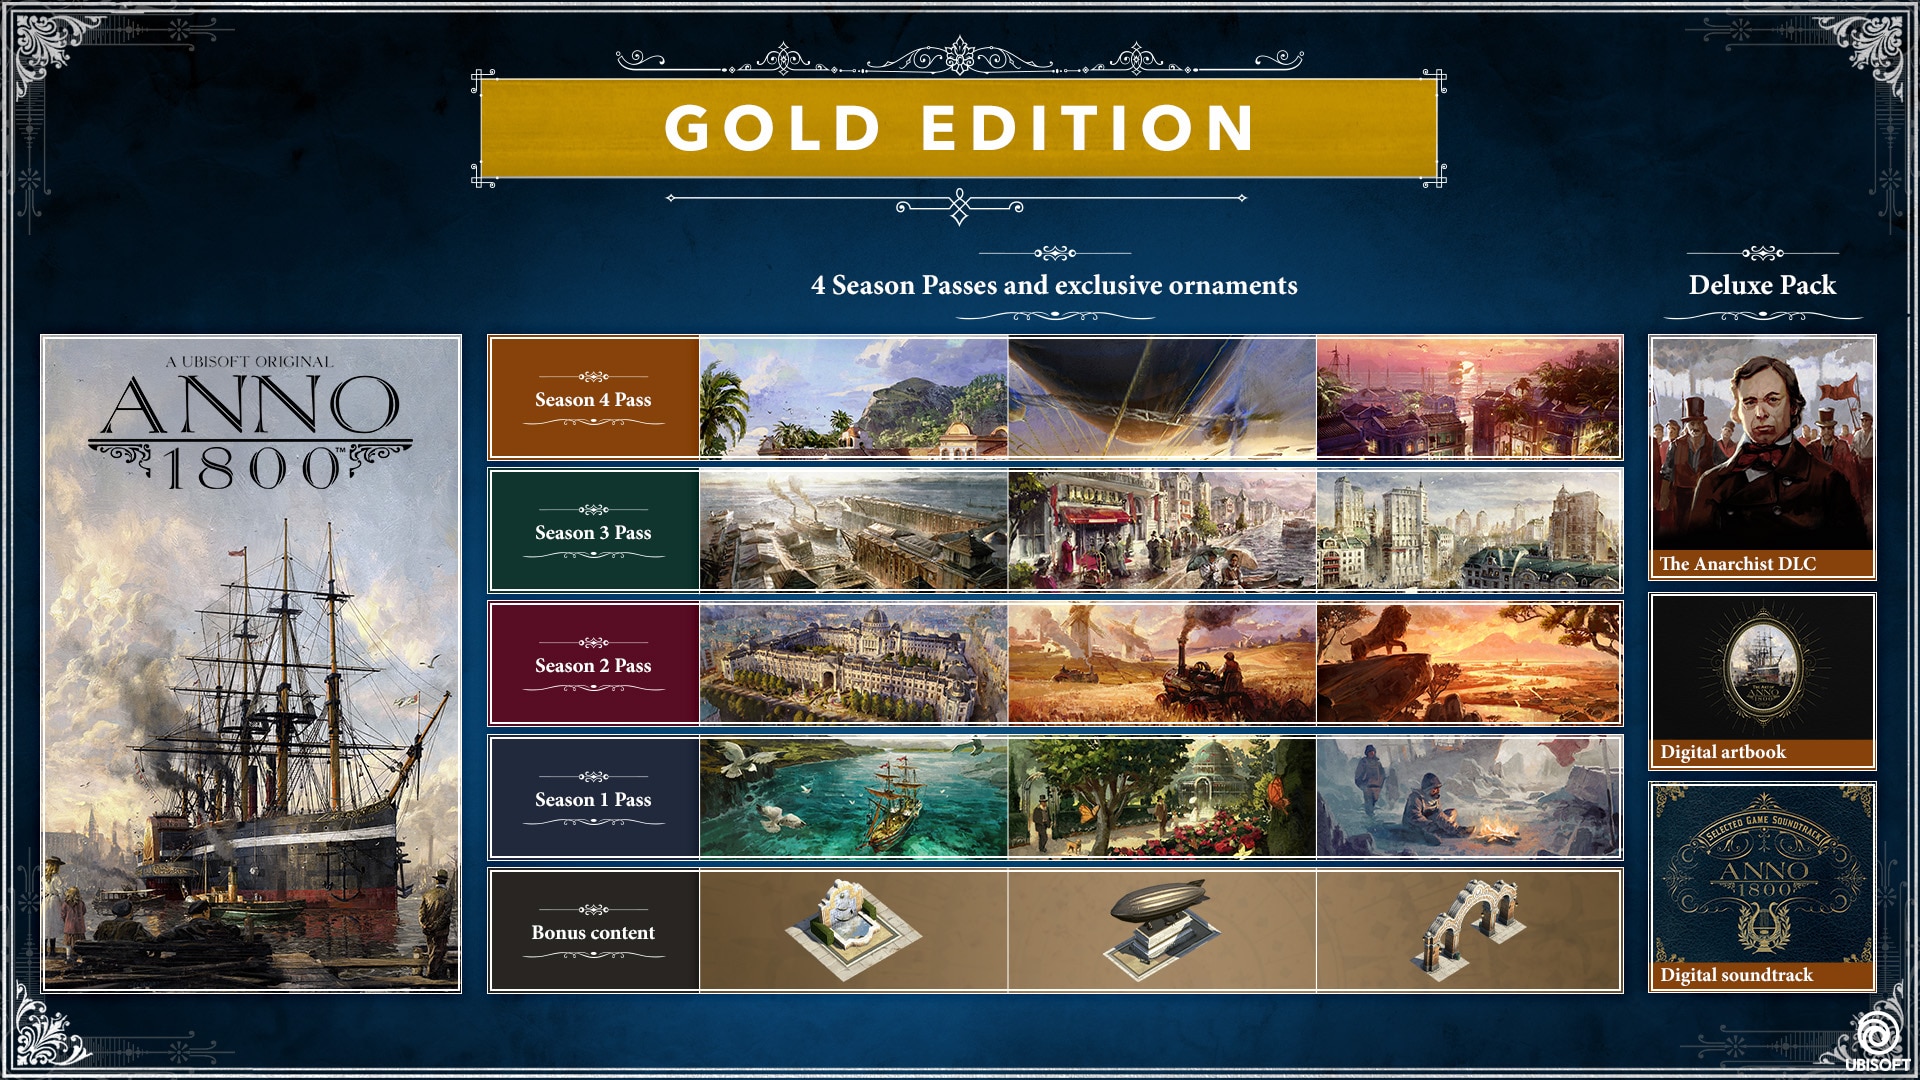 Contents of Anno 1800 editions | Ubisoft Help